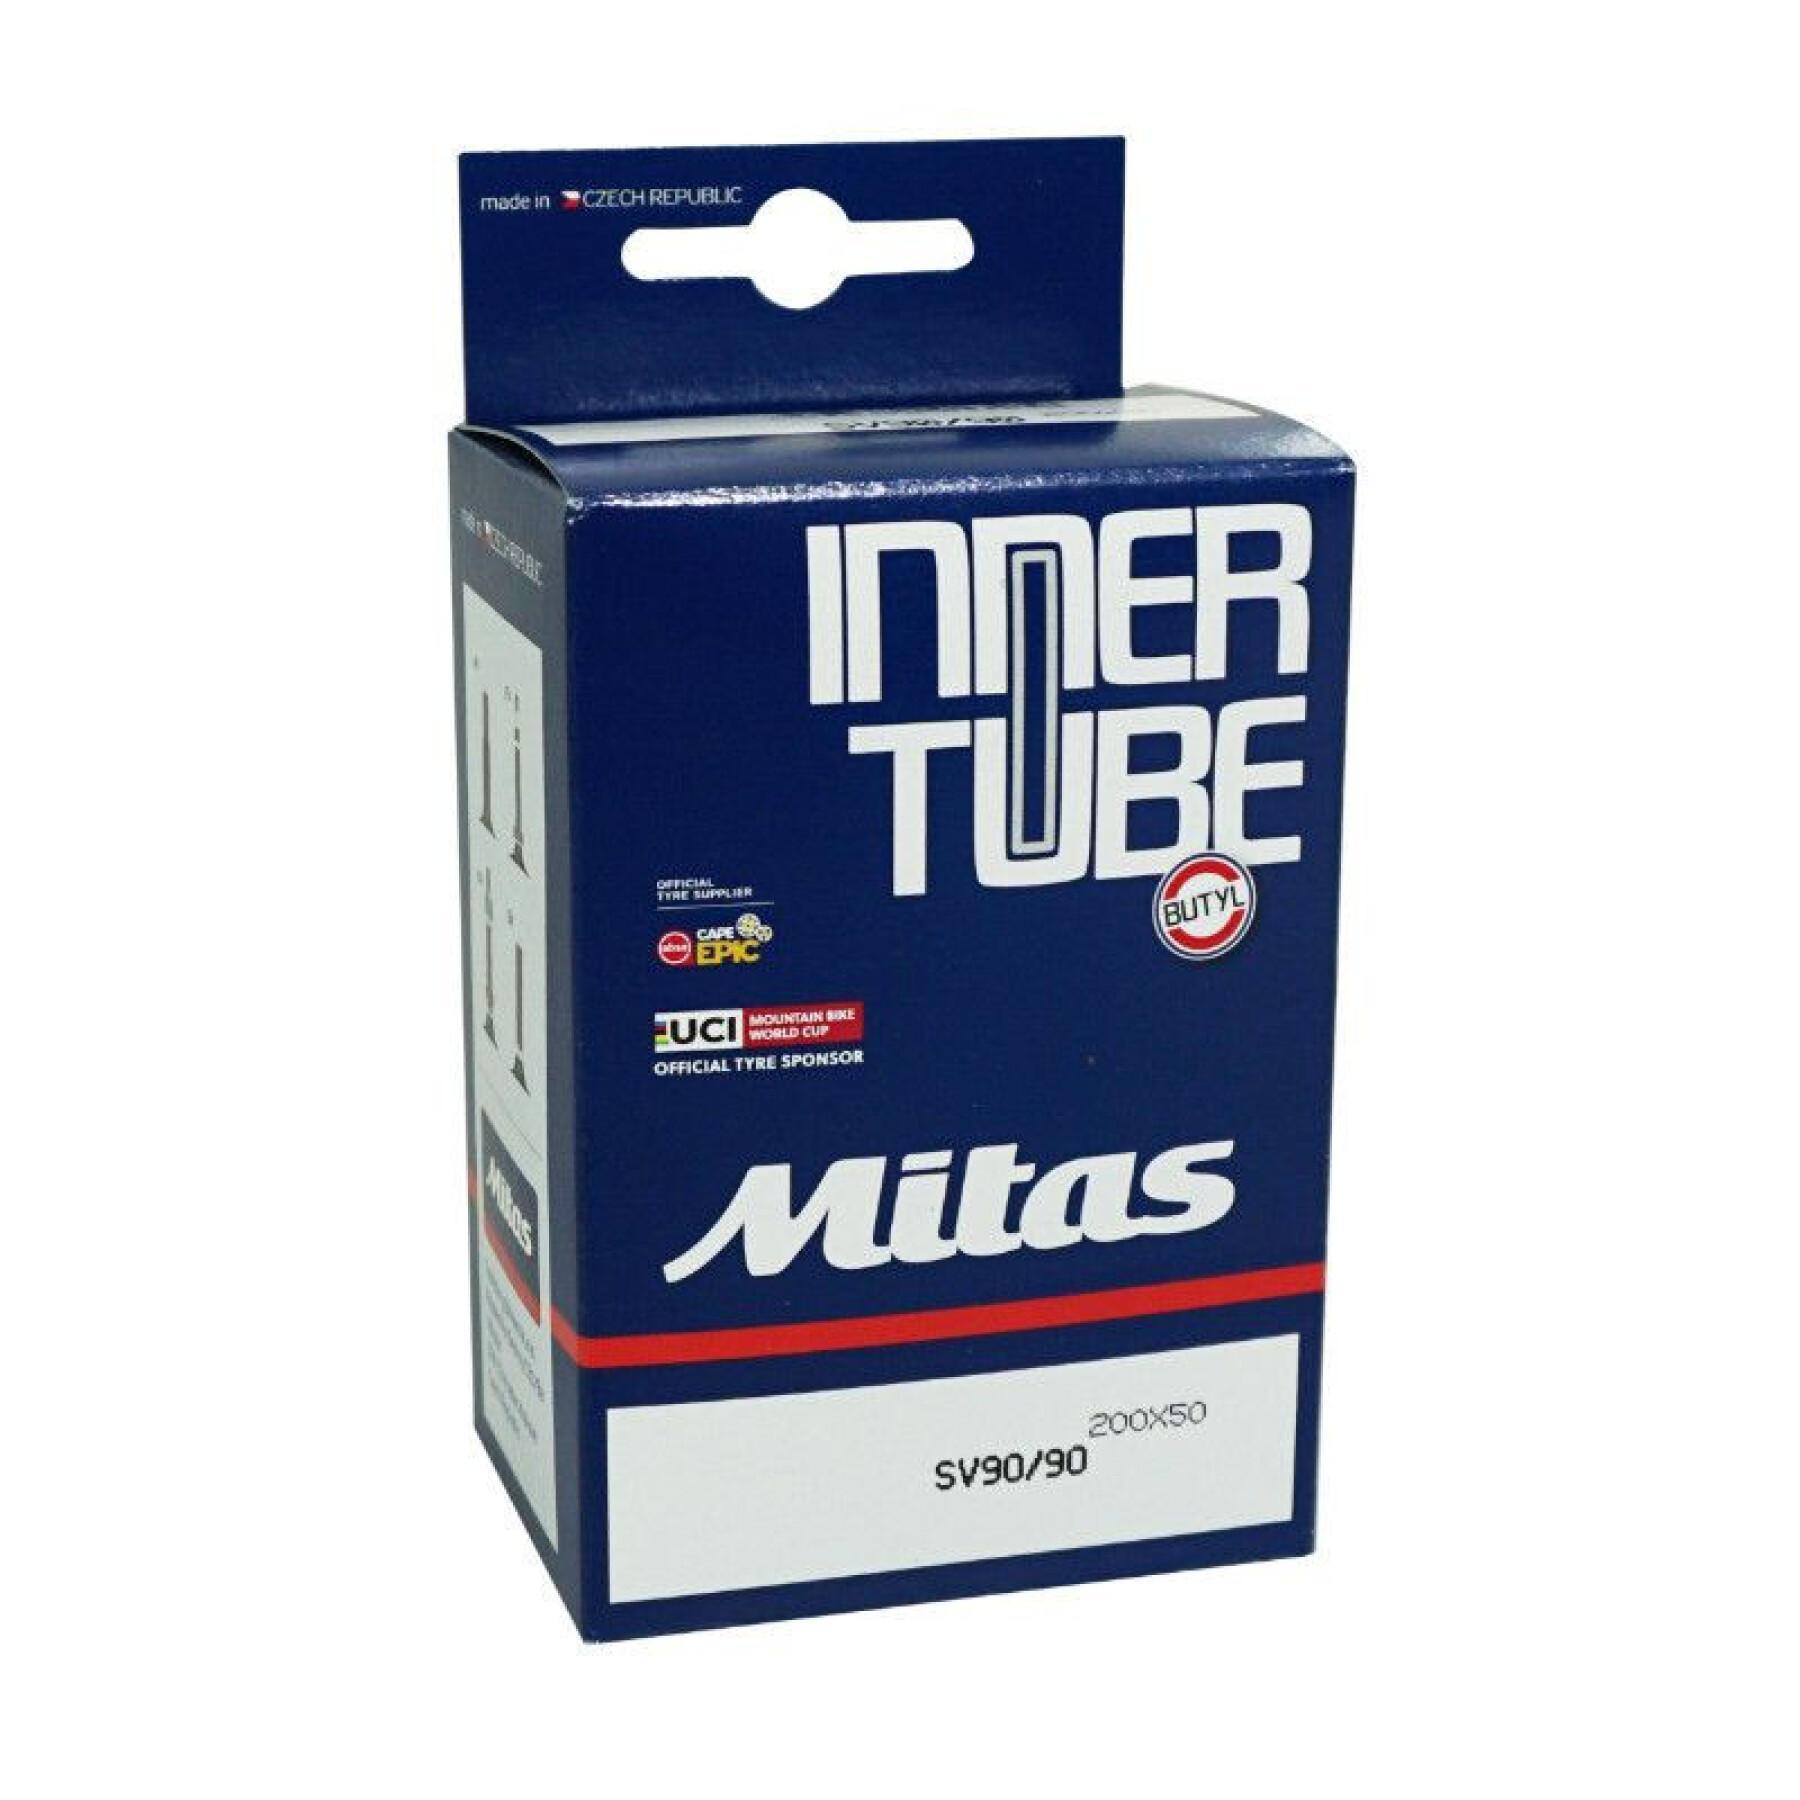 Inner tube for strollers and scooters Mitas